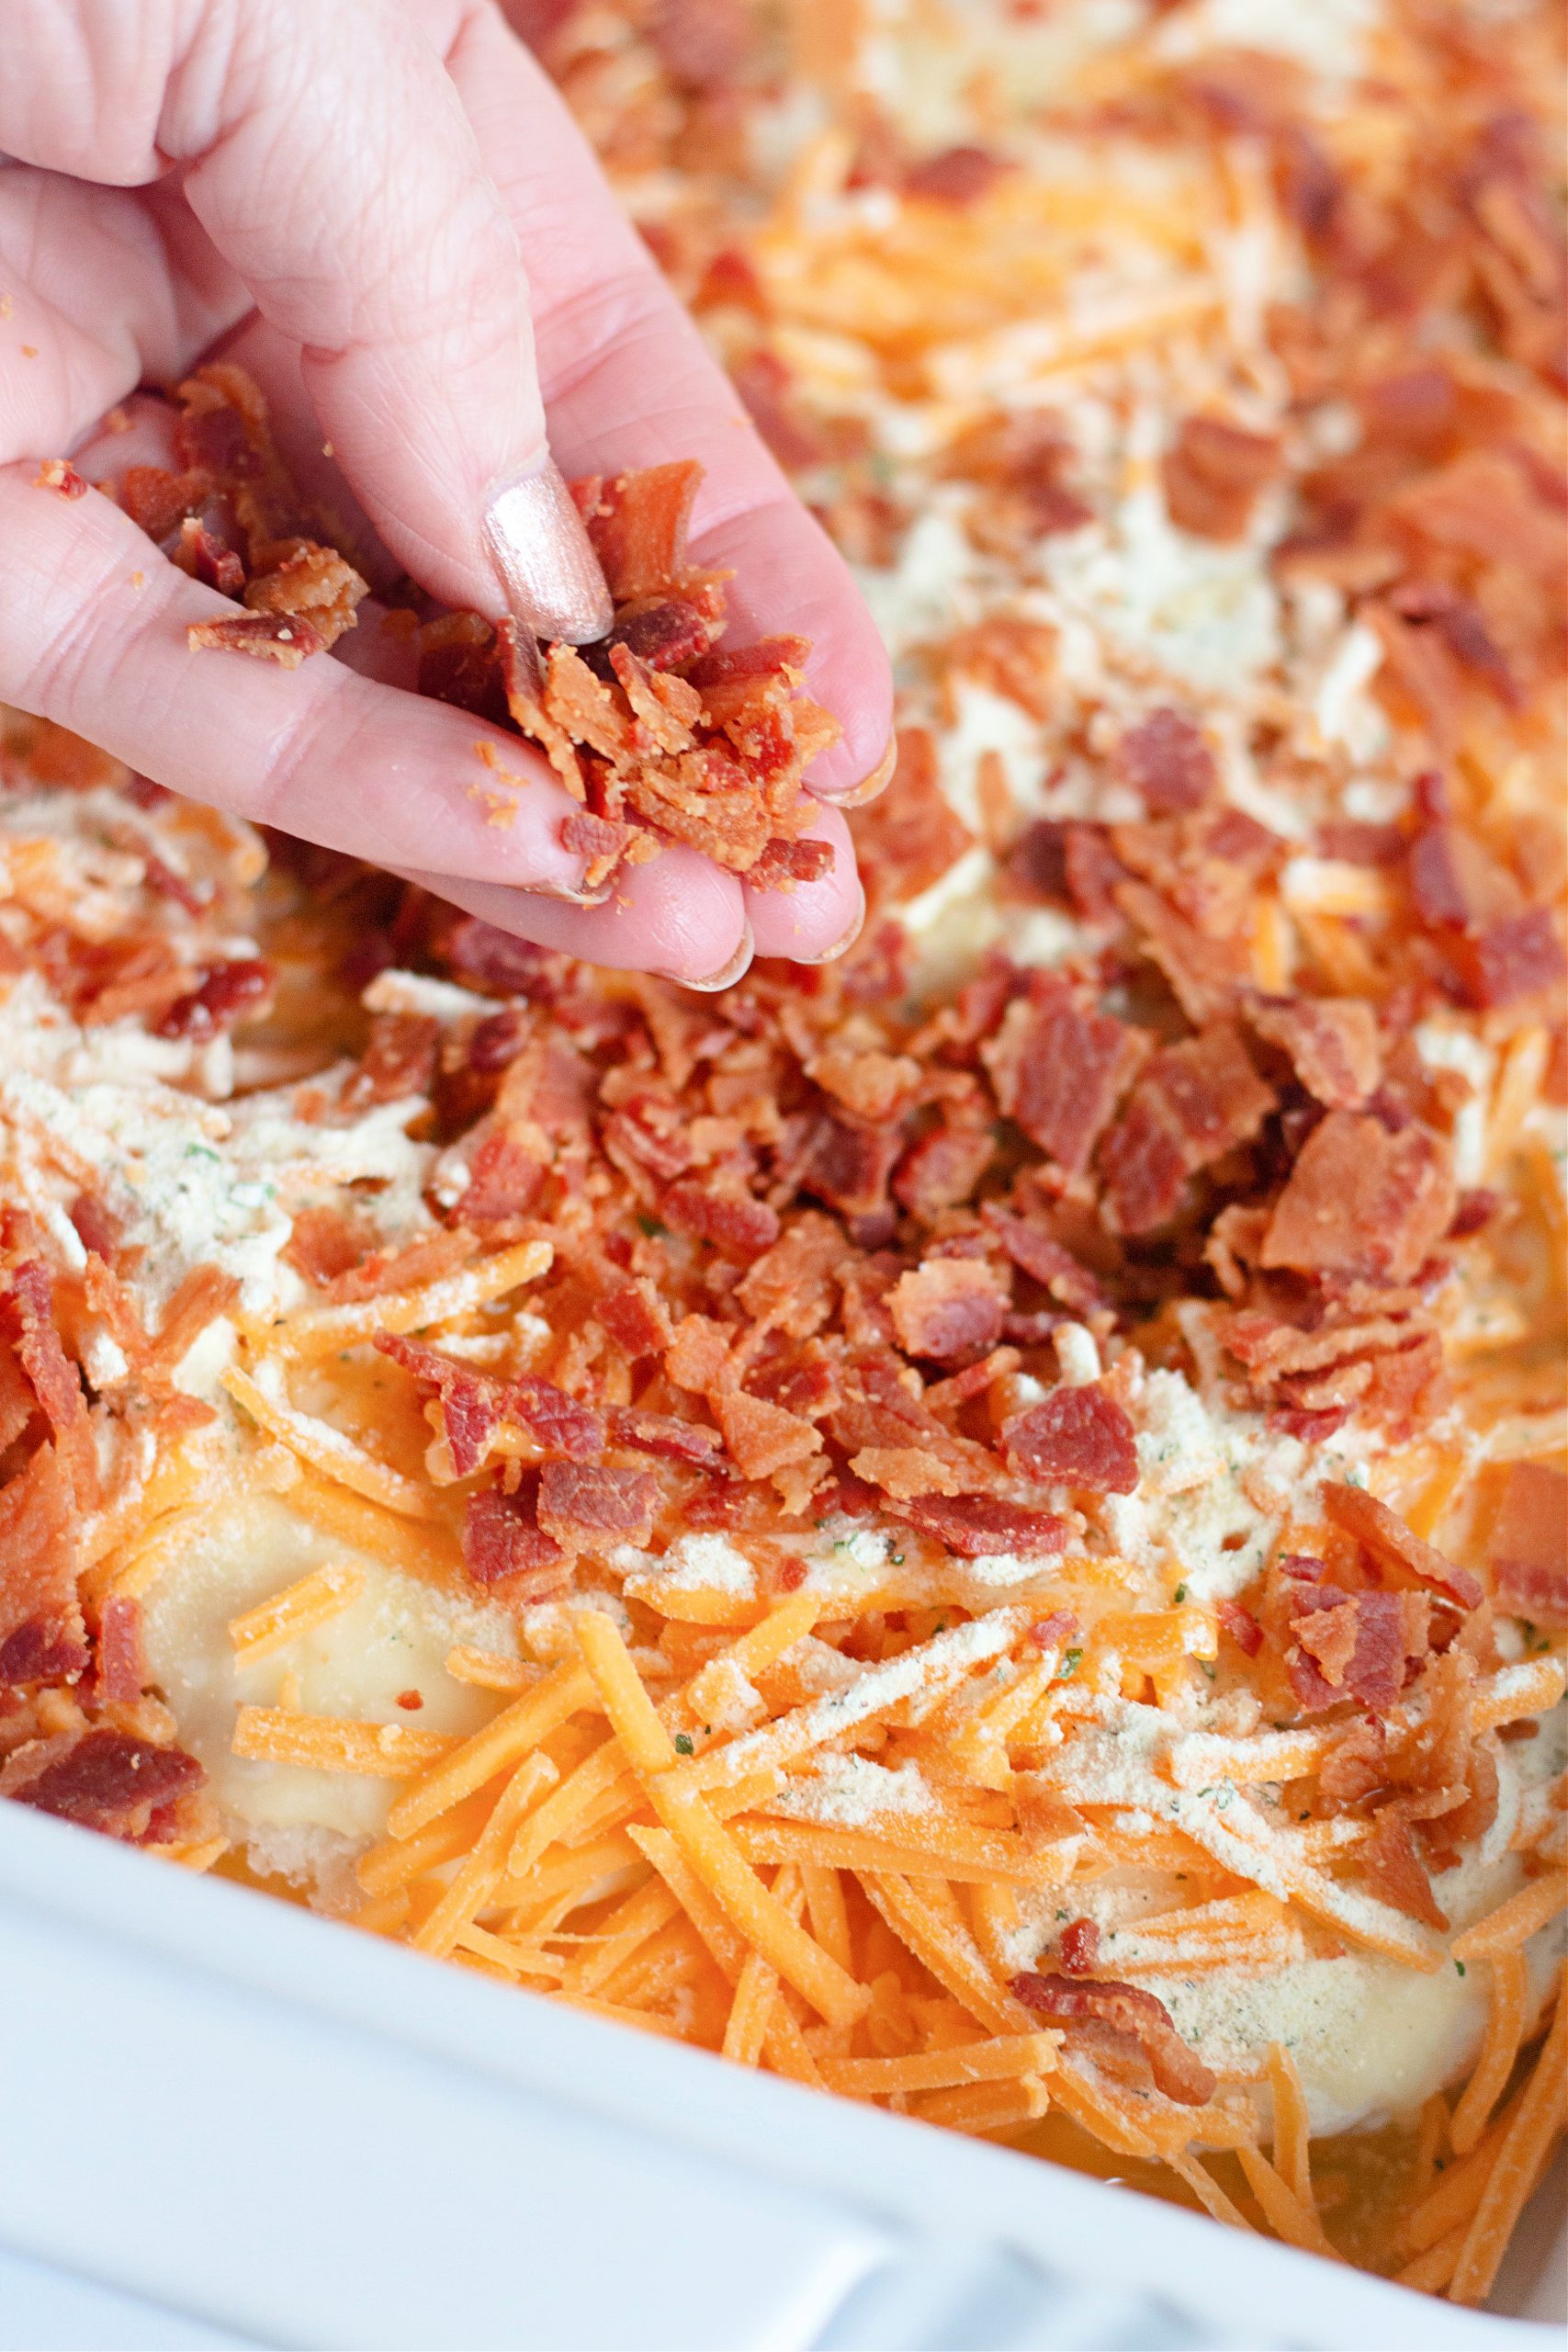 Woman's hand sprinkling crumbled bacon over baked biscuits.